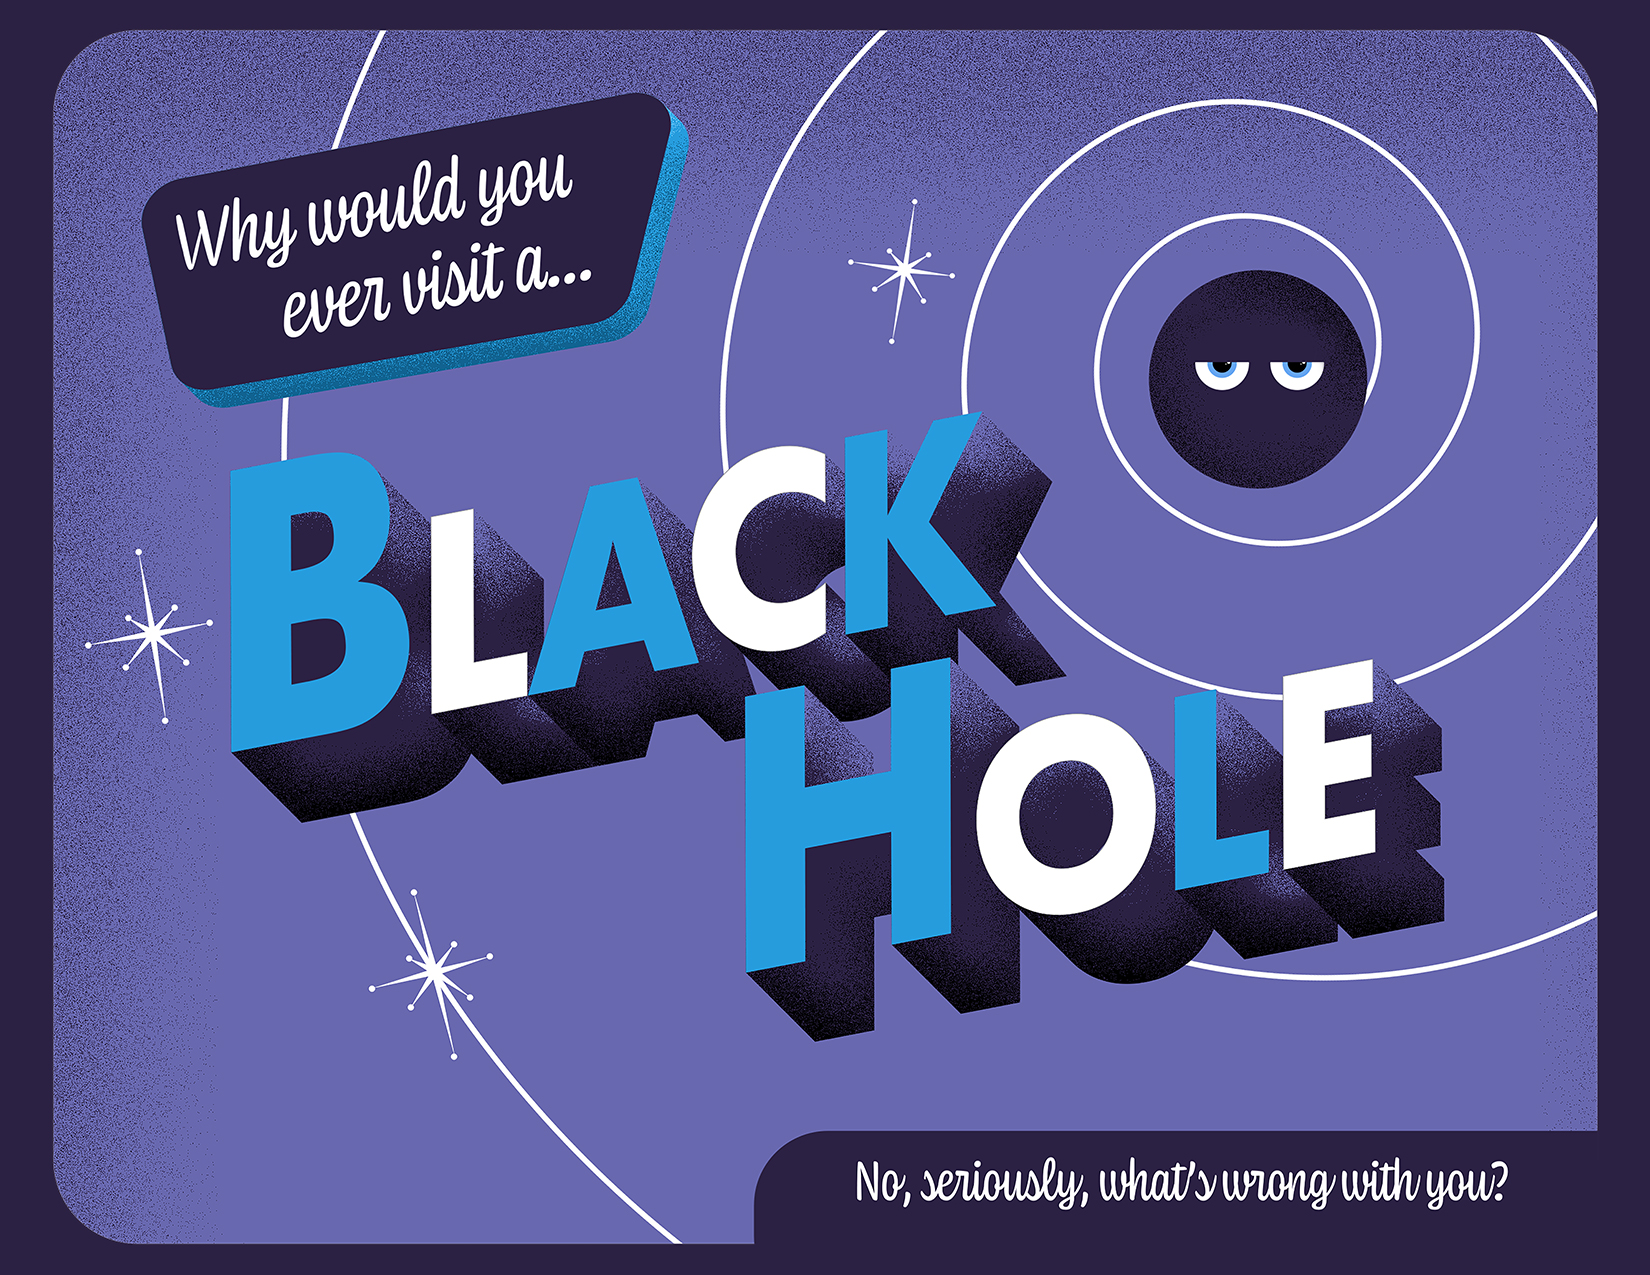 A dark purple circle with eyes shaped like half-circles stares out from the right side of this image. It sits on a purple background, with a white swirl that starts behind the black hole and spins outward off the edges of the image. Text across the center of the card in a retro font and reads: “Why would you ever visit a … Black Hole.” At the bottom left another line of text says, “No, seriously, what’s wrong with you?”